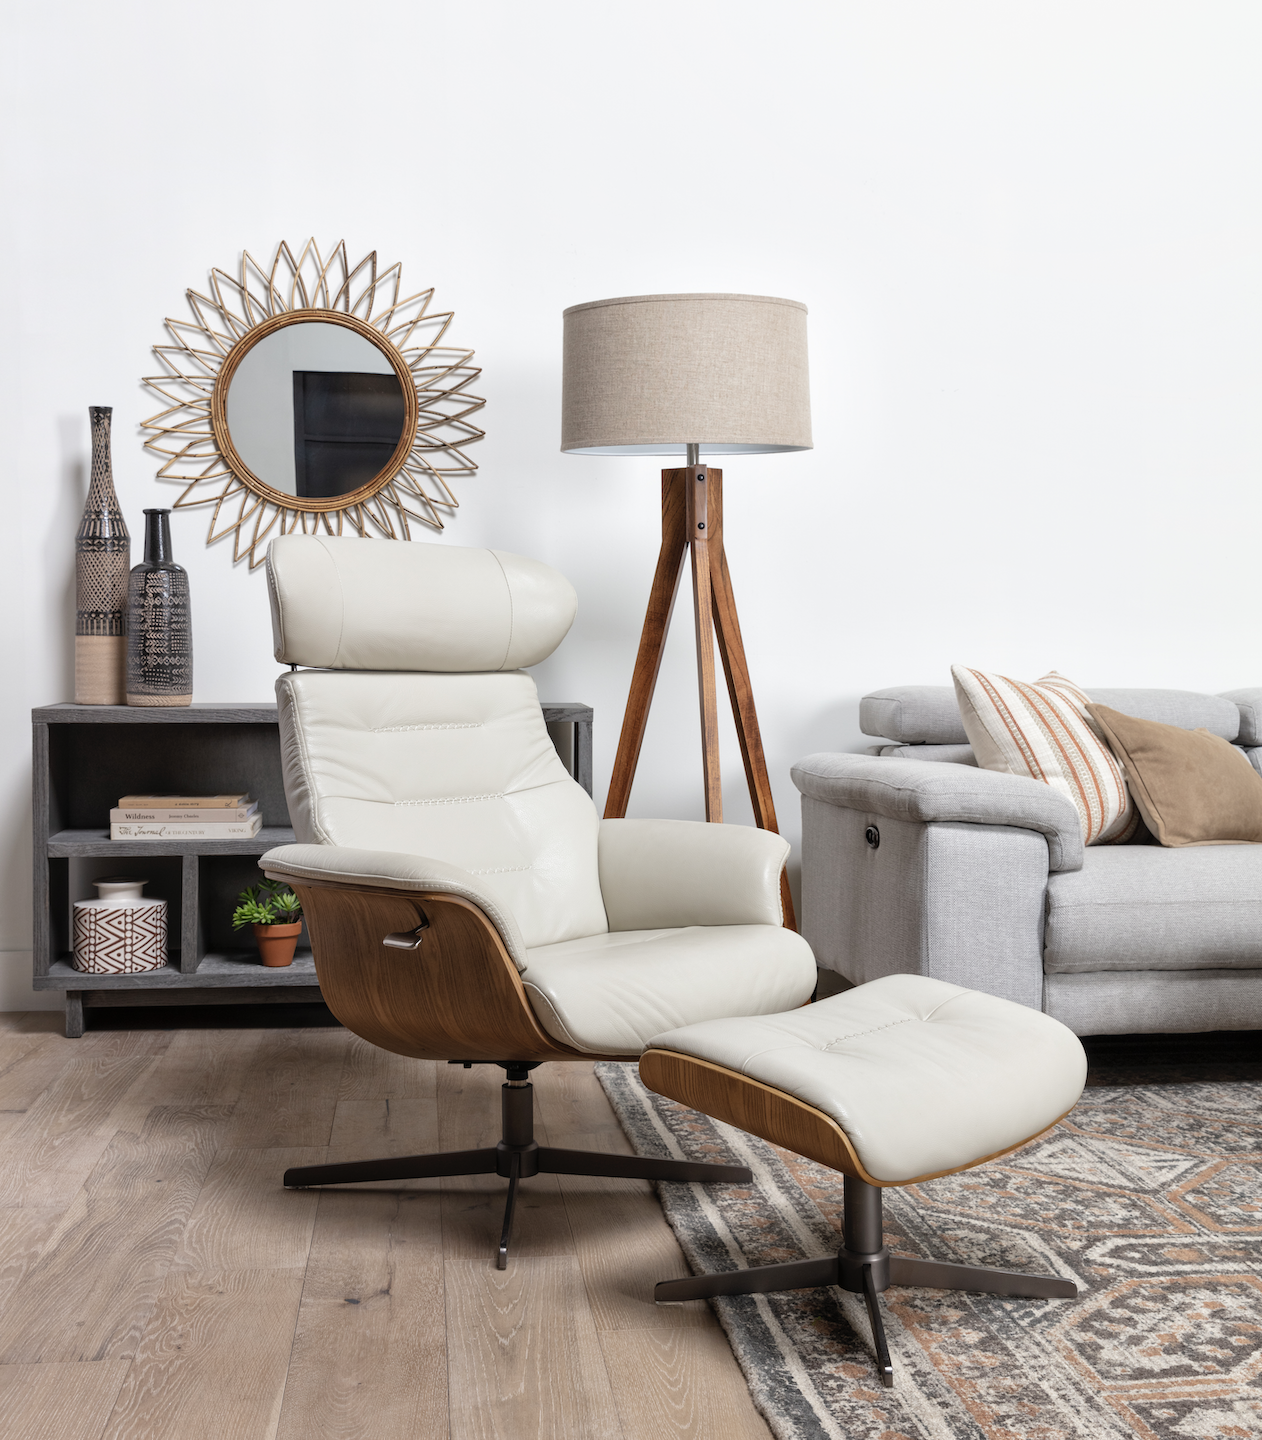 Swivel Chair With Ottoman That Catch An
  Eye